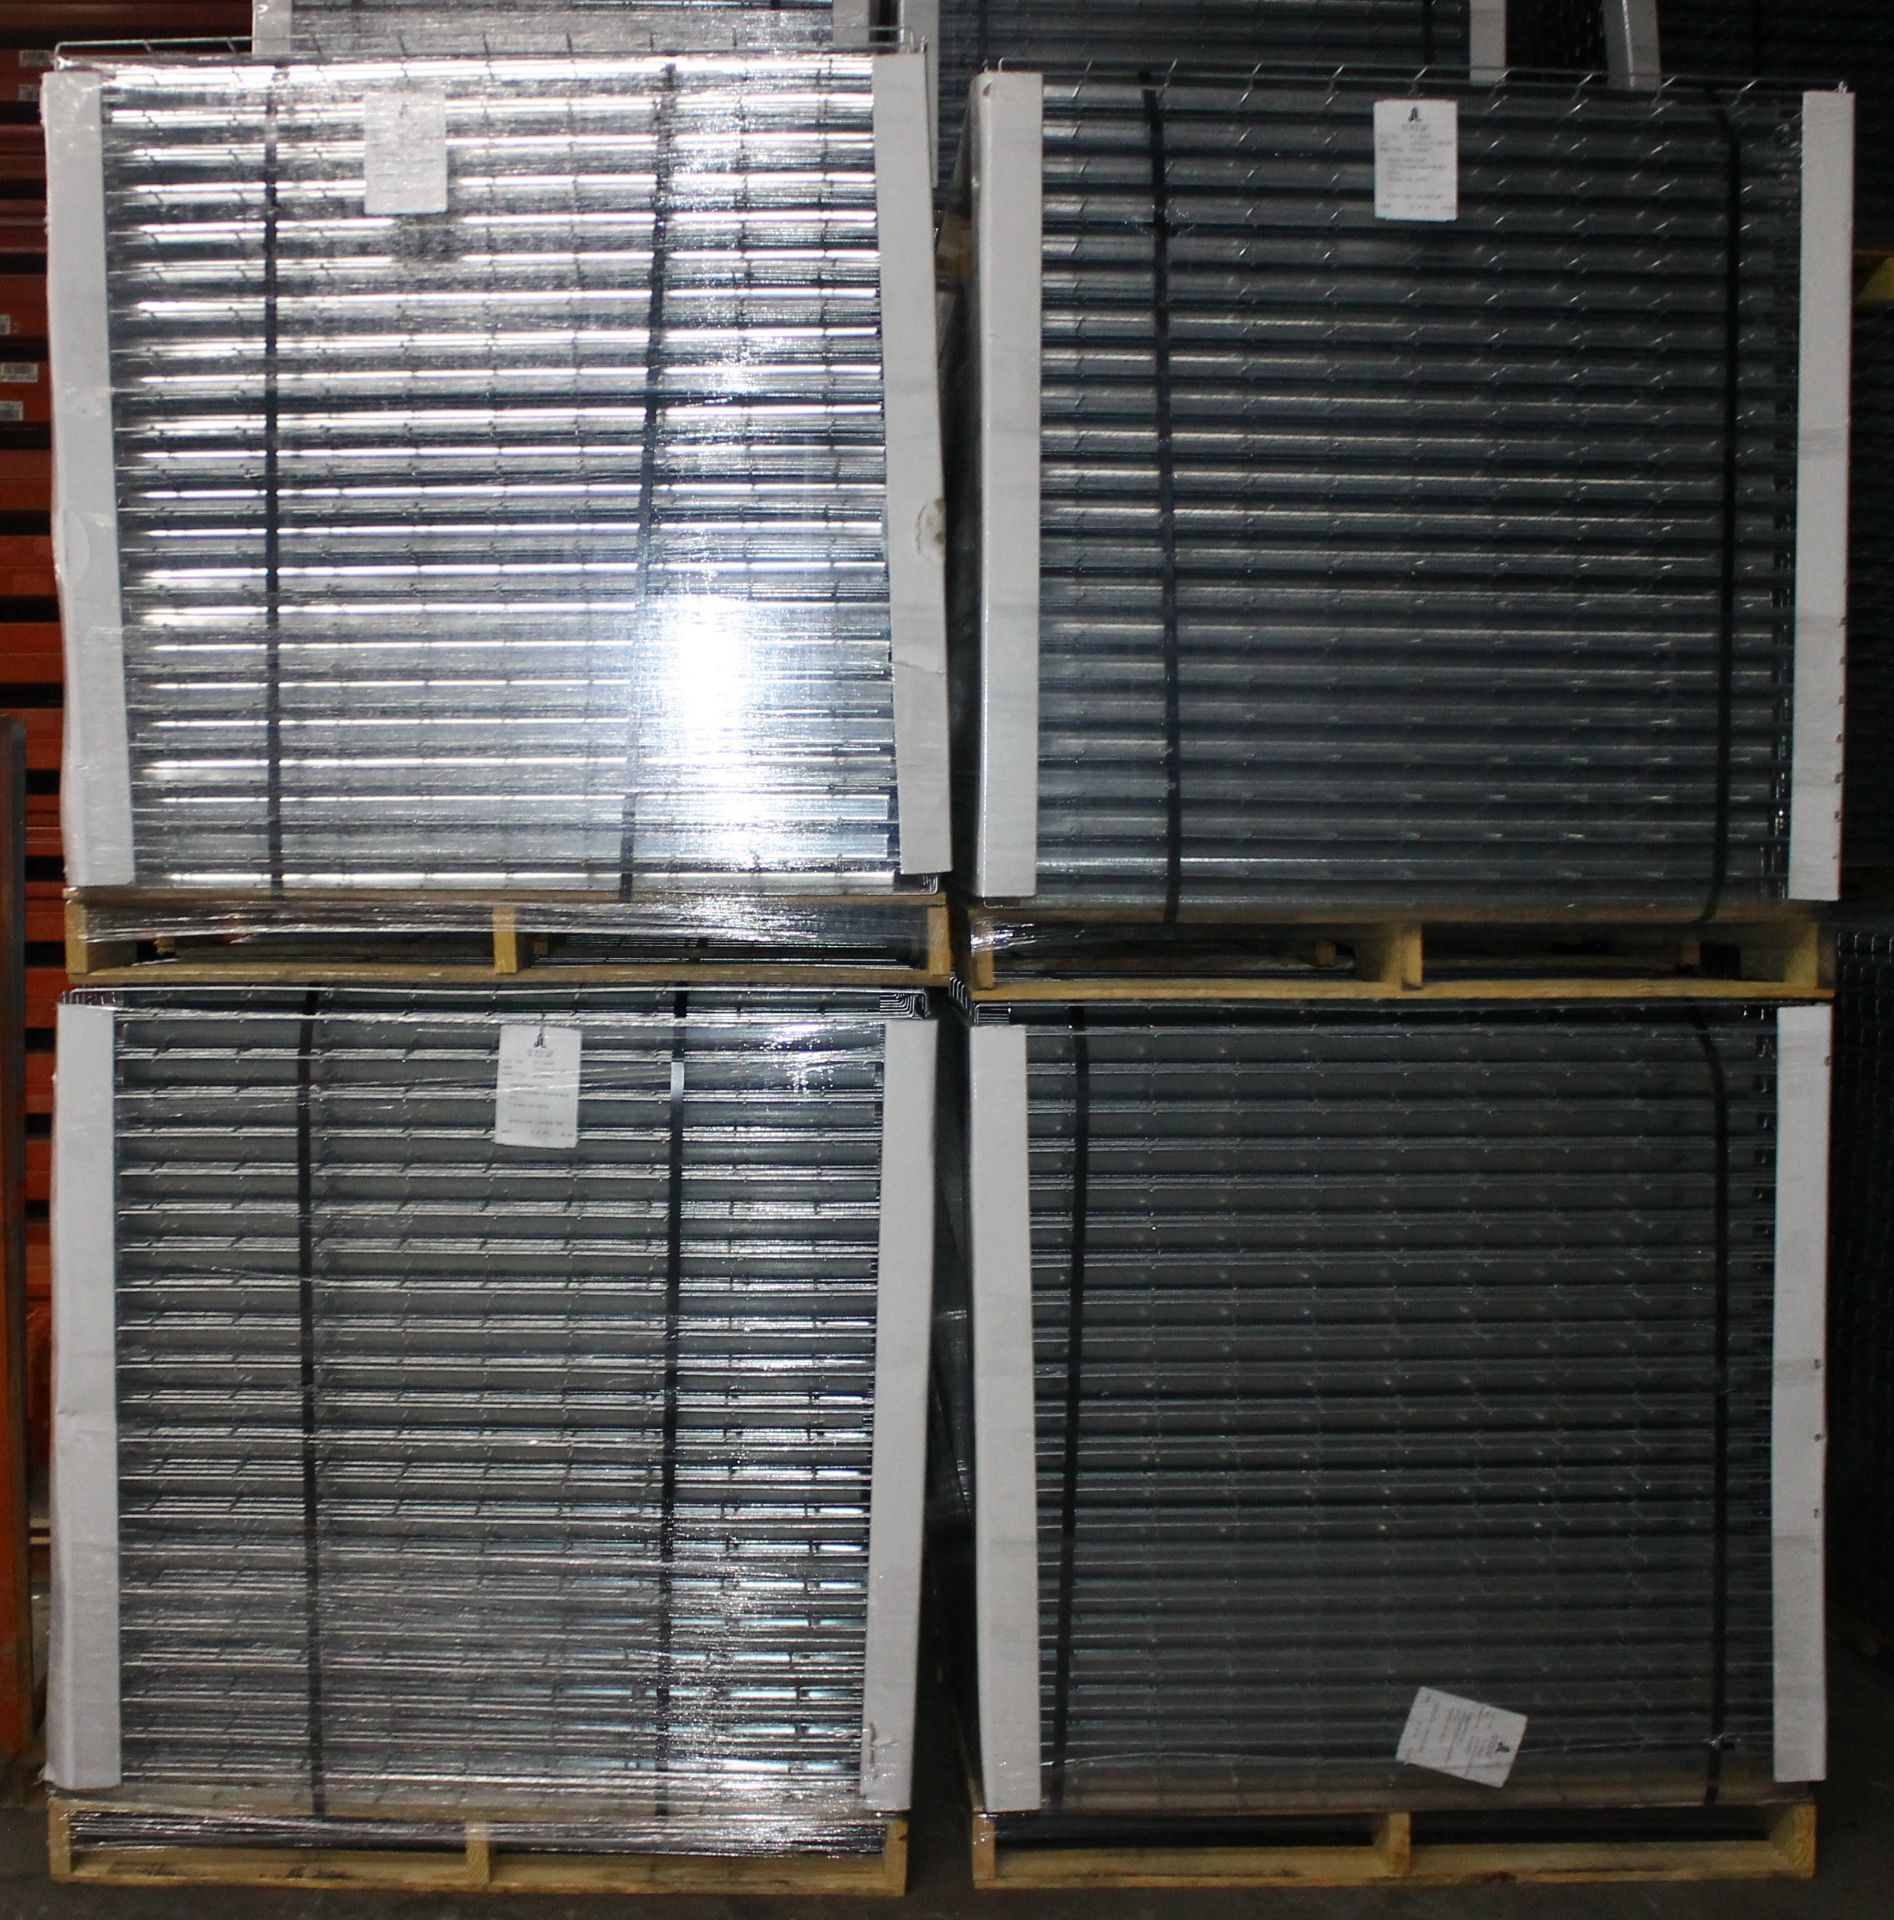 NEW 120 PCS OF STANDARD 42" X 53" WIREDECK - 2050 LBS CAPACITY - Image 2 of 2